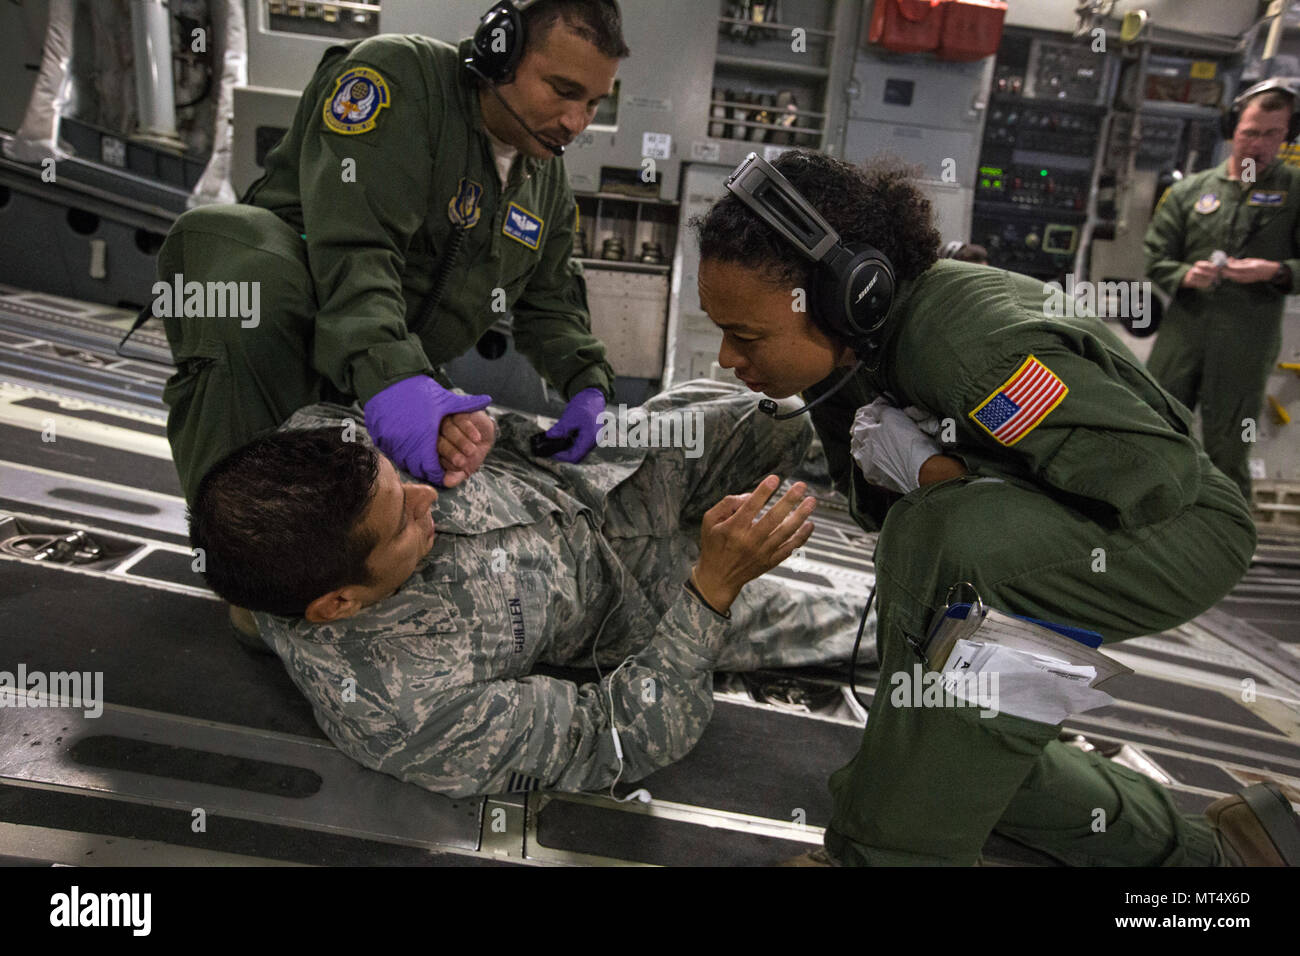 U.S. Air Force Master Sgt. Linda W. Daniels, right, and Master Sgt. Louis J. Muzyka, left, both aeromedical evacuation technicians, assist simulated psychiatric outpatient Staff Sgt. Edward Guillen, all with the 514th Aeromedical Evacuation Squadron, 514th Air Mobility Wing, during an aeromedical evacuation training mission onboard a 305th Air Mobility Wing C-17 Globemaster III to Nashville, Tenn., July 29, 2017. The training’s purpose is to teach flight nurses and aeromedical evacuation technicians how to respond to scenarios during the evacuation of sick or wounded personnel, and how to hand Stock Photo